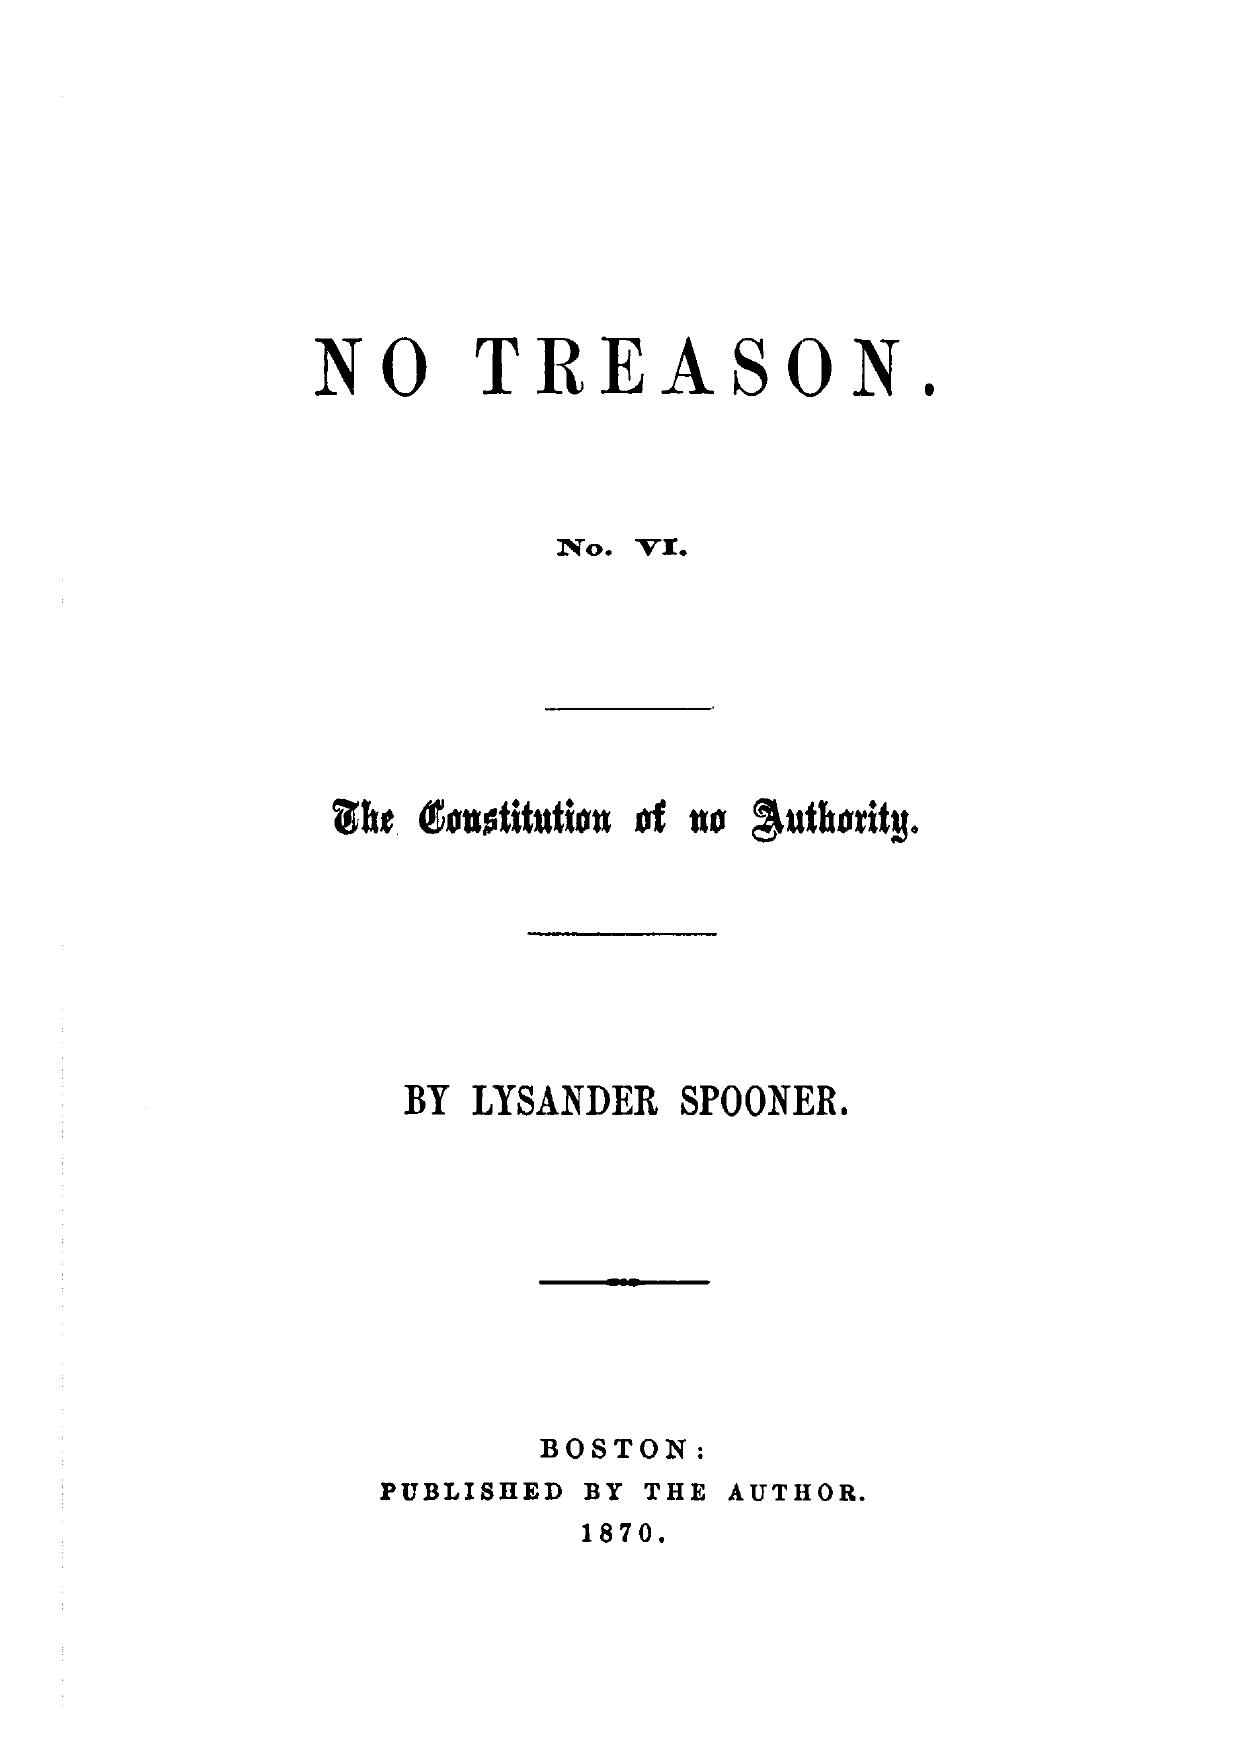 No Treason VI - The Constitution of No Authority (1870) by Lysander Spooner